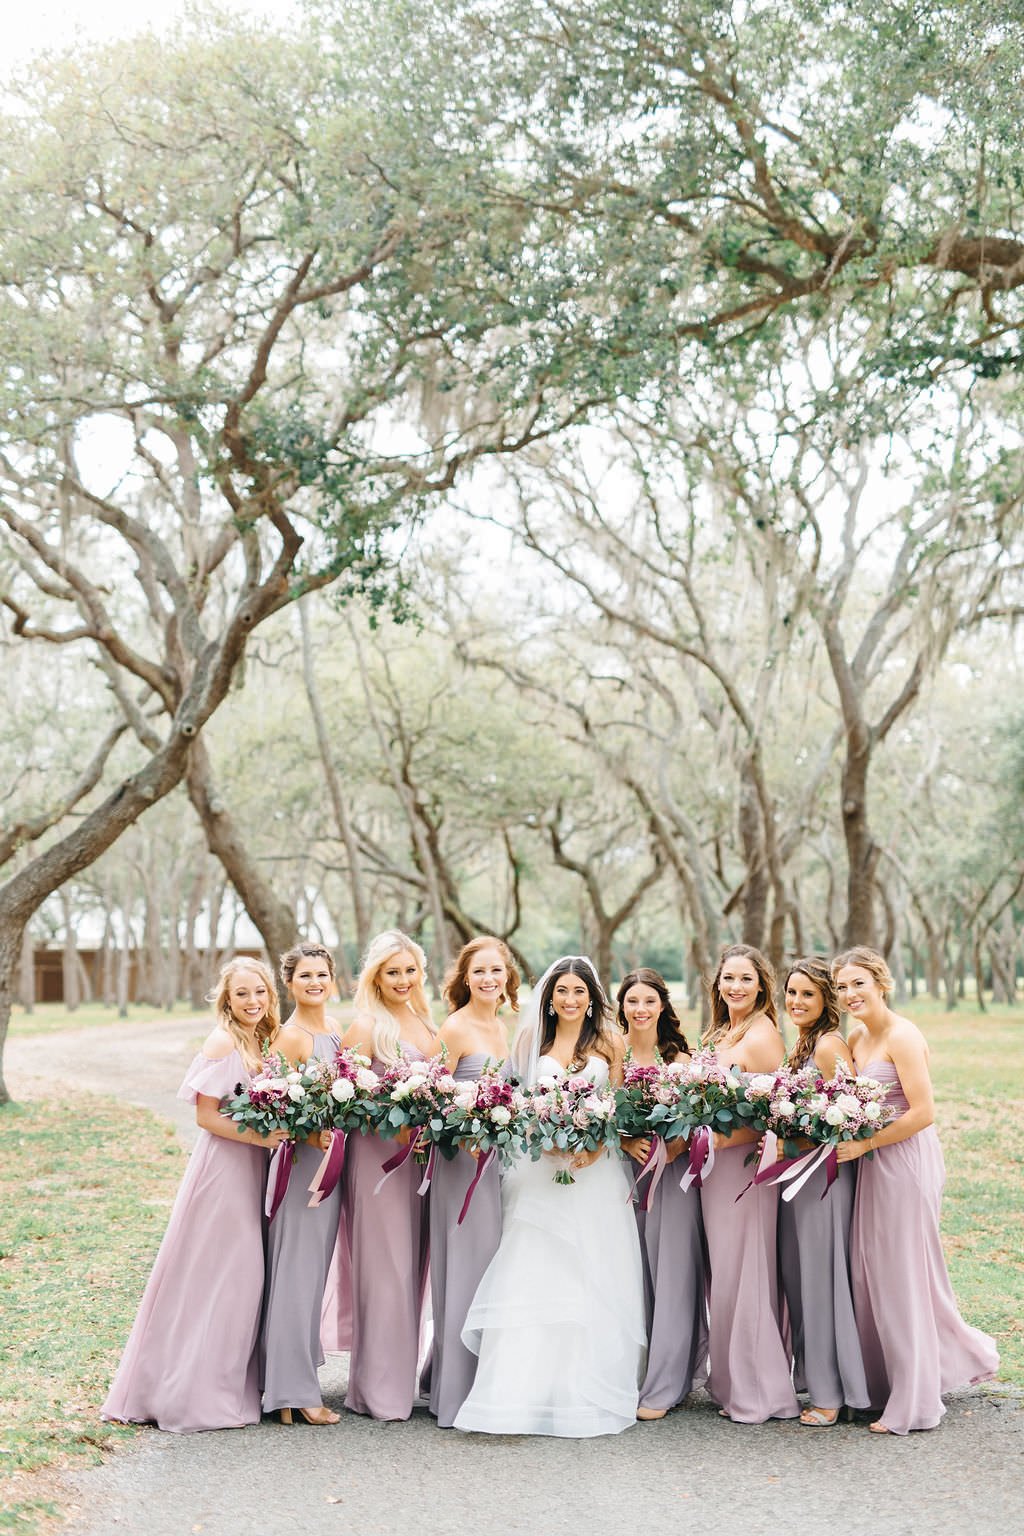 Outdoor Bride and Bridesmaids Wedding Portrait in Sweetheart Strapless Ballgown Wedding Dress and Veil with Pink, White and Greenery Floral Bouquet, Bridesmaids in Mismatched Mauve/Lilac Dresses | Tampa Bay Wedding Planner Burlap to Lace | Tampa Venue The Lange Farm